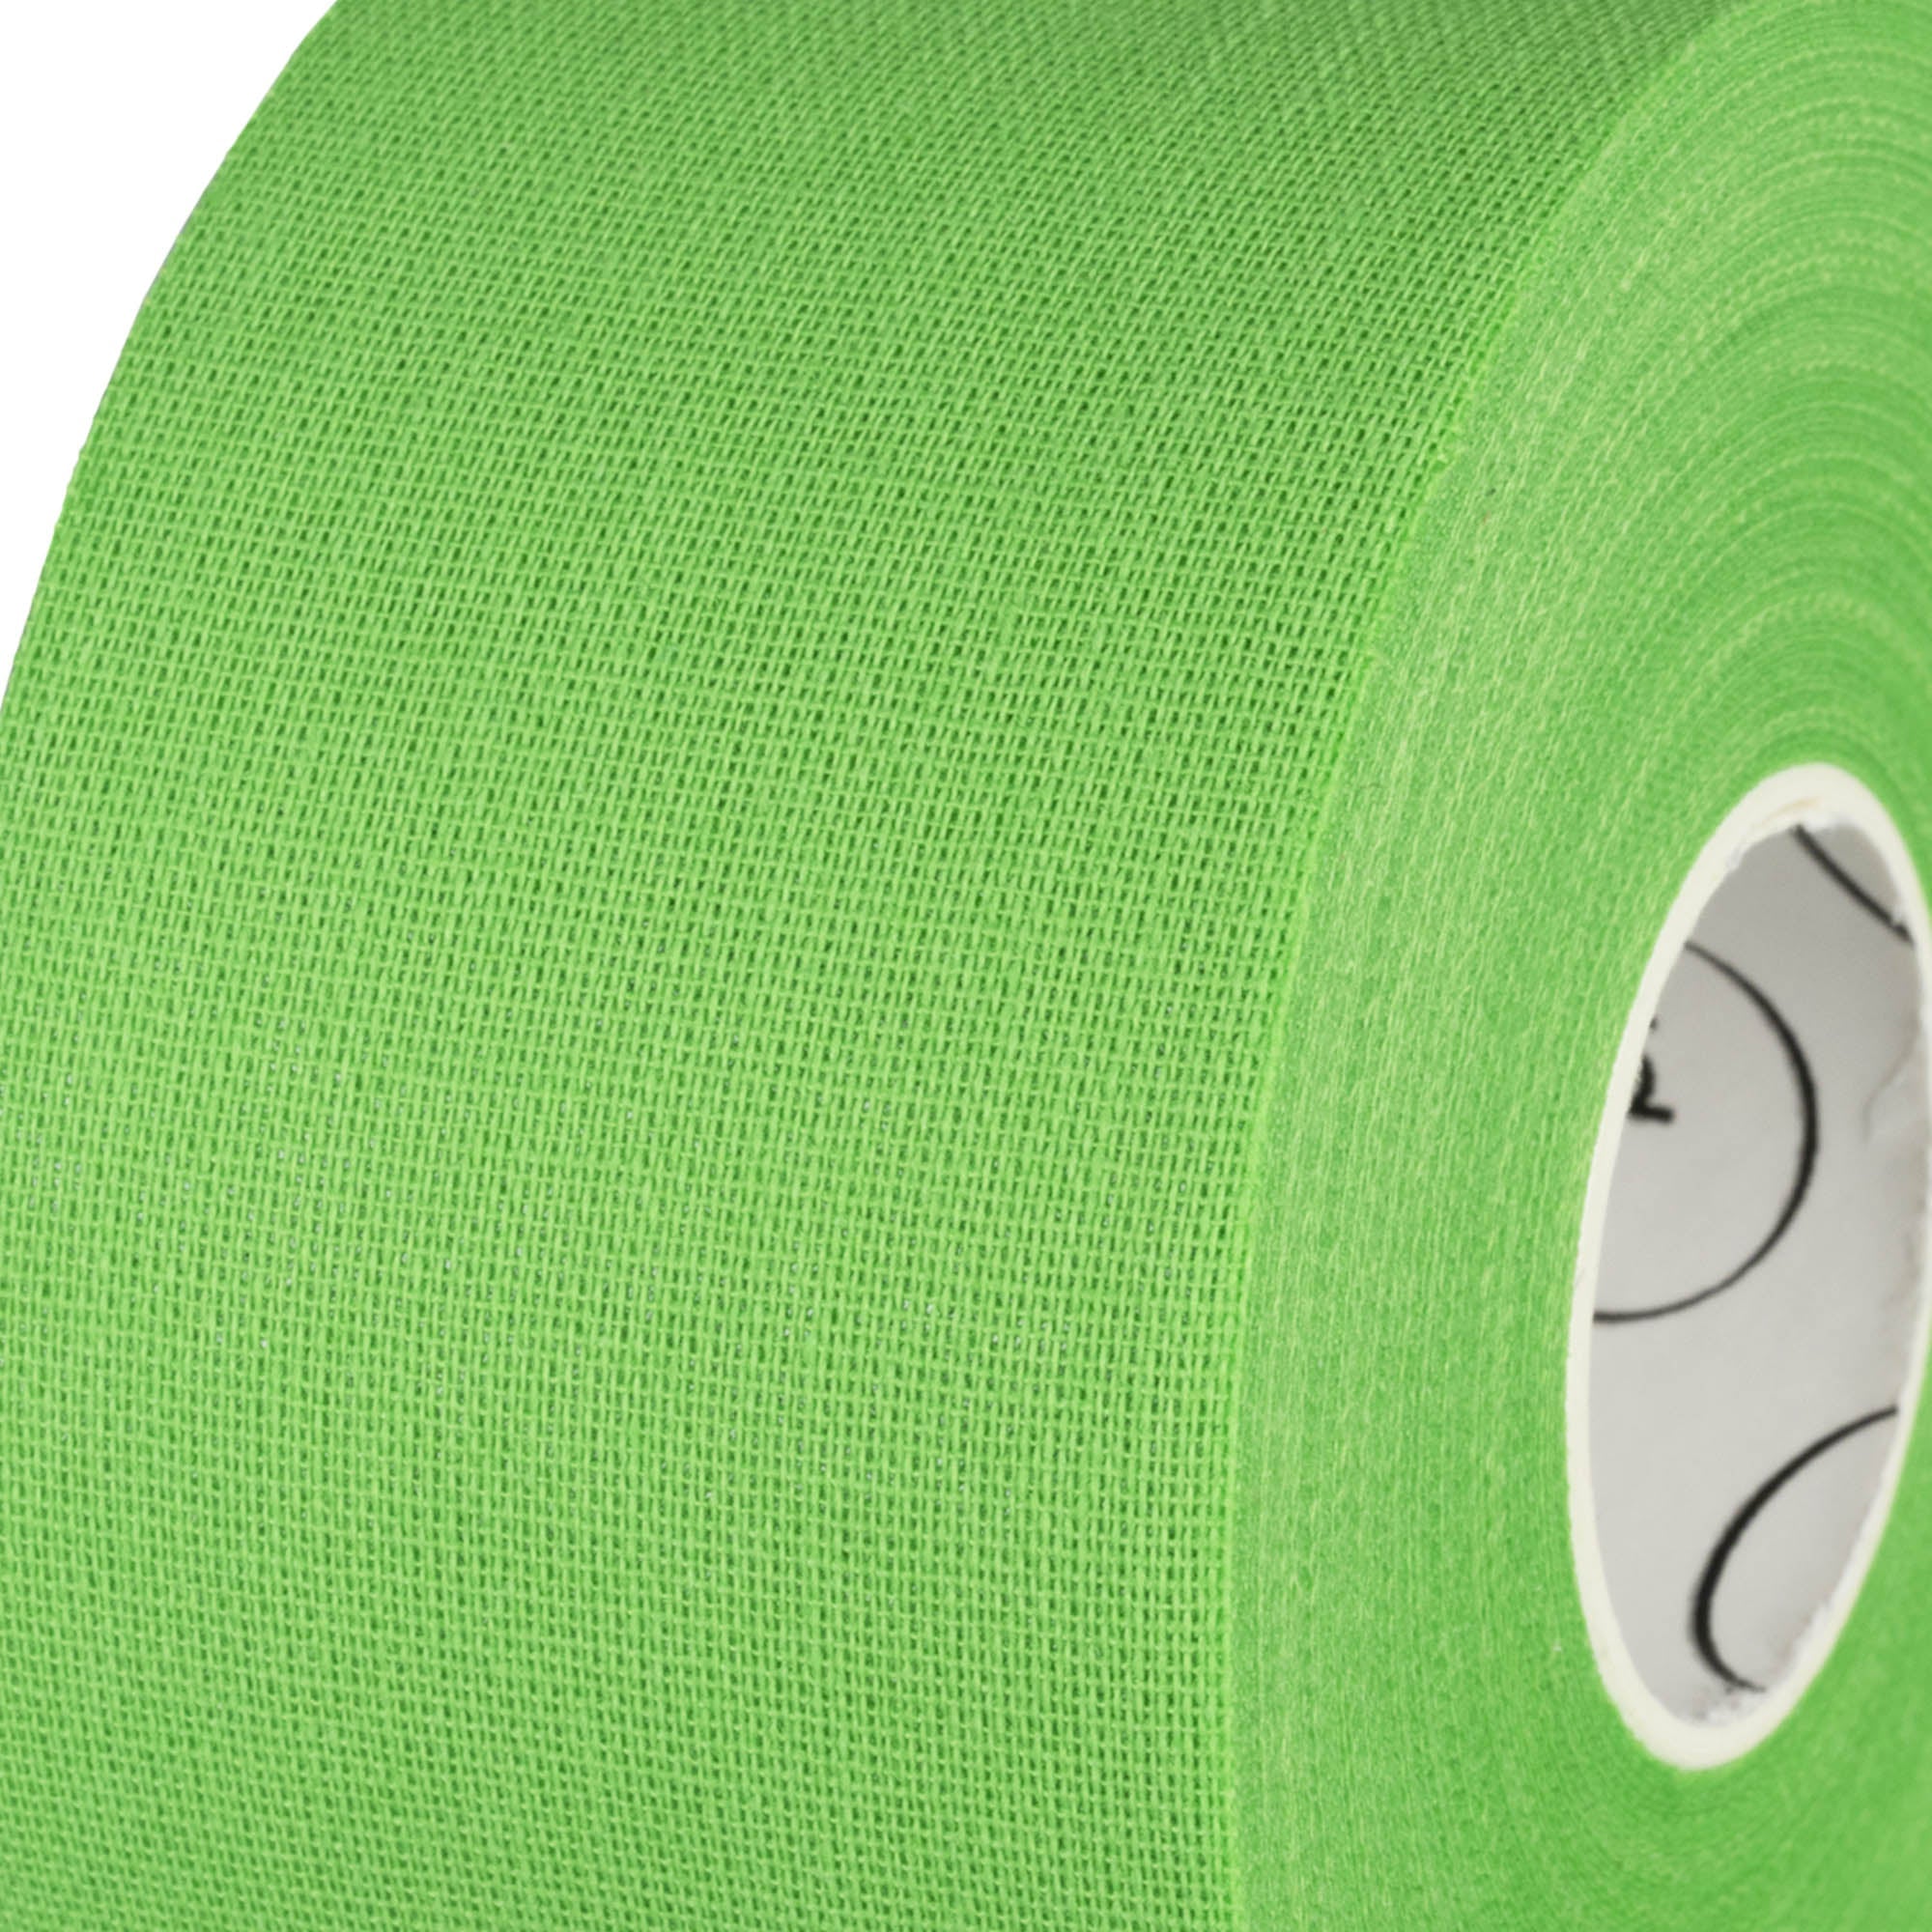 Green prodigy snake tape texture